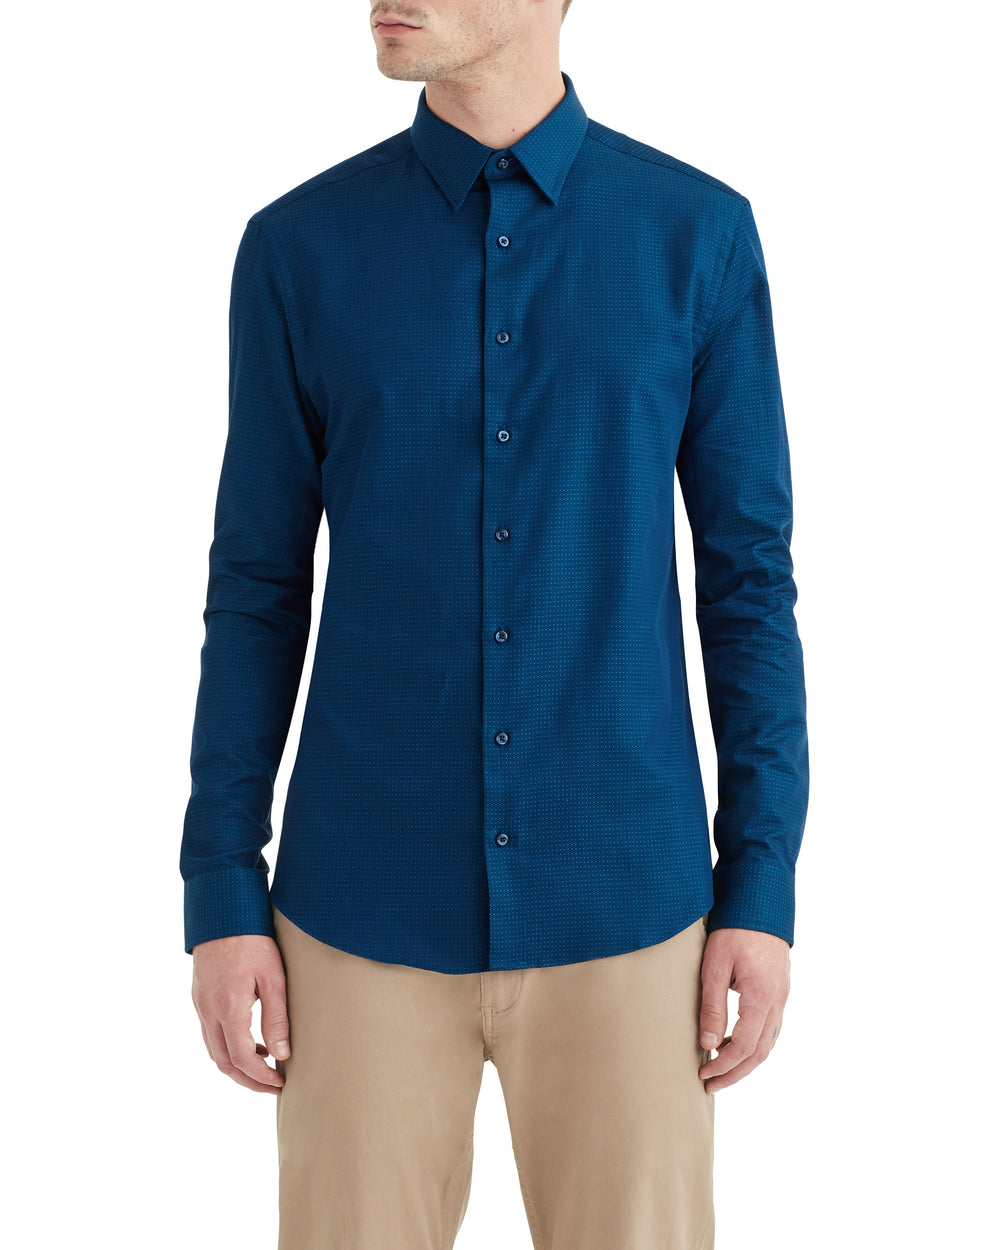 Teal & Navy Solid Dobby Slim Fit Dress Shirt